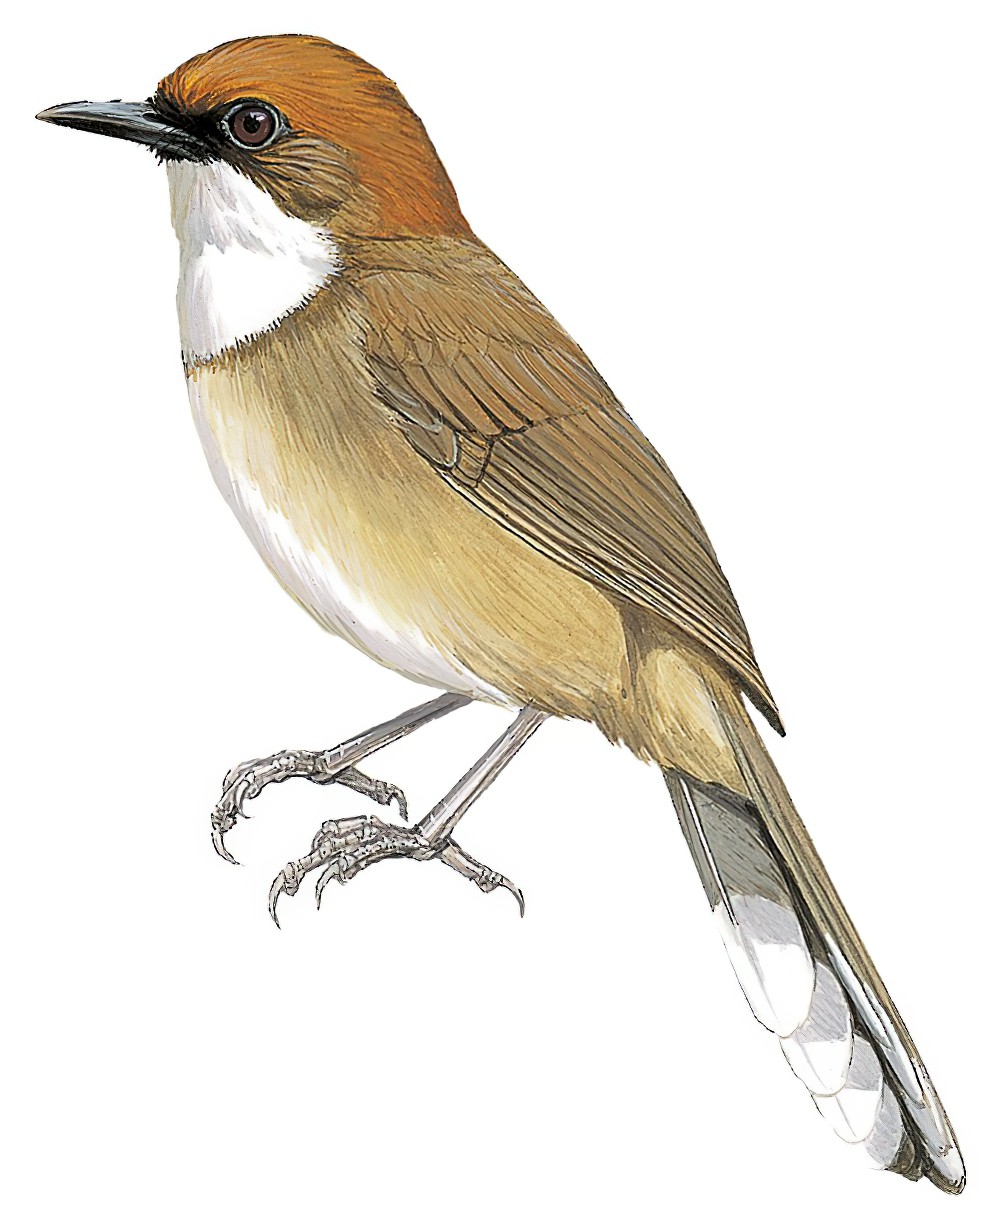 Rufous-crowned Laughingthrush / Ianthocincla ruficeps